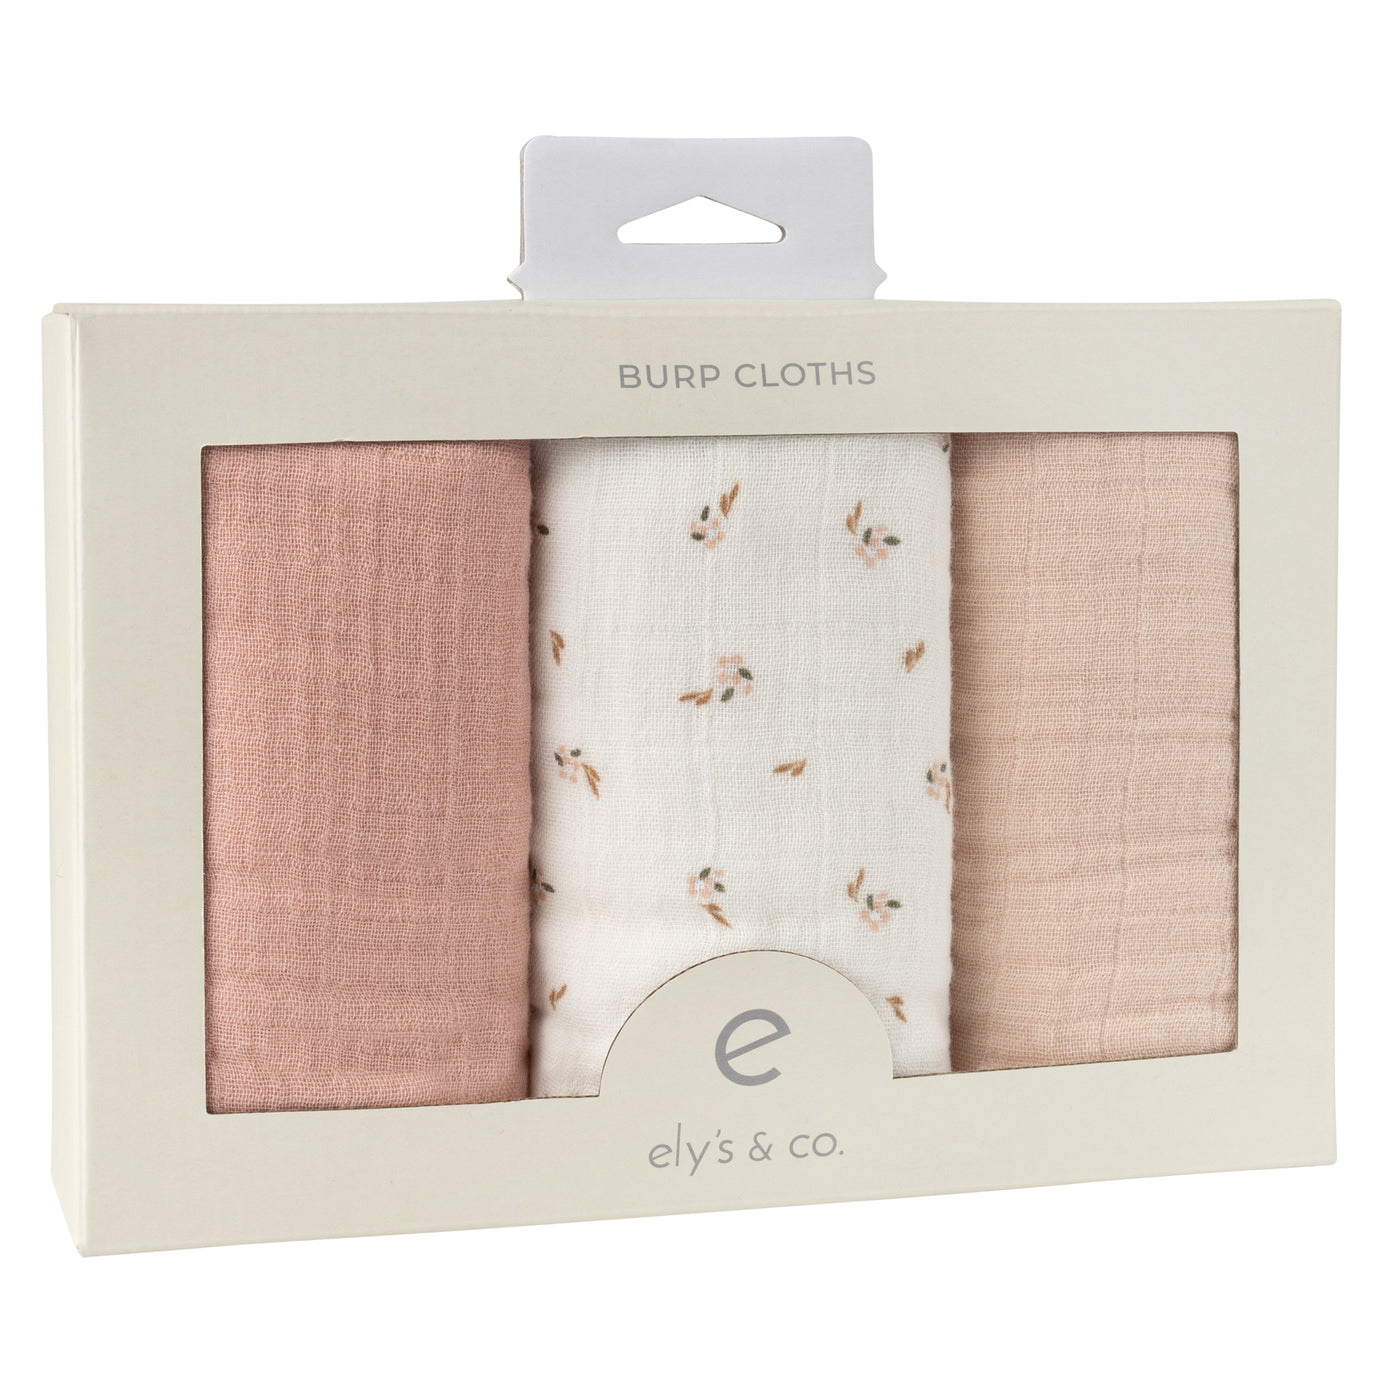 Ely's & Co. Muslin Contoured Burp Cloth Three Pack - Floral Pink Collection